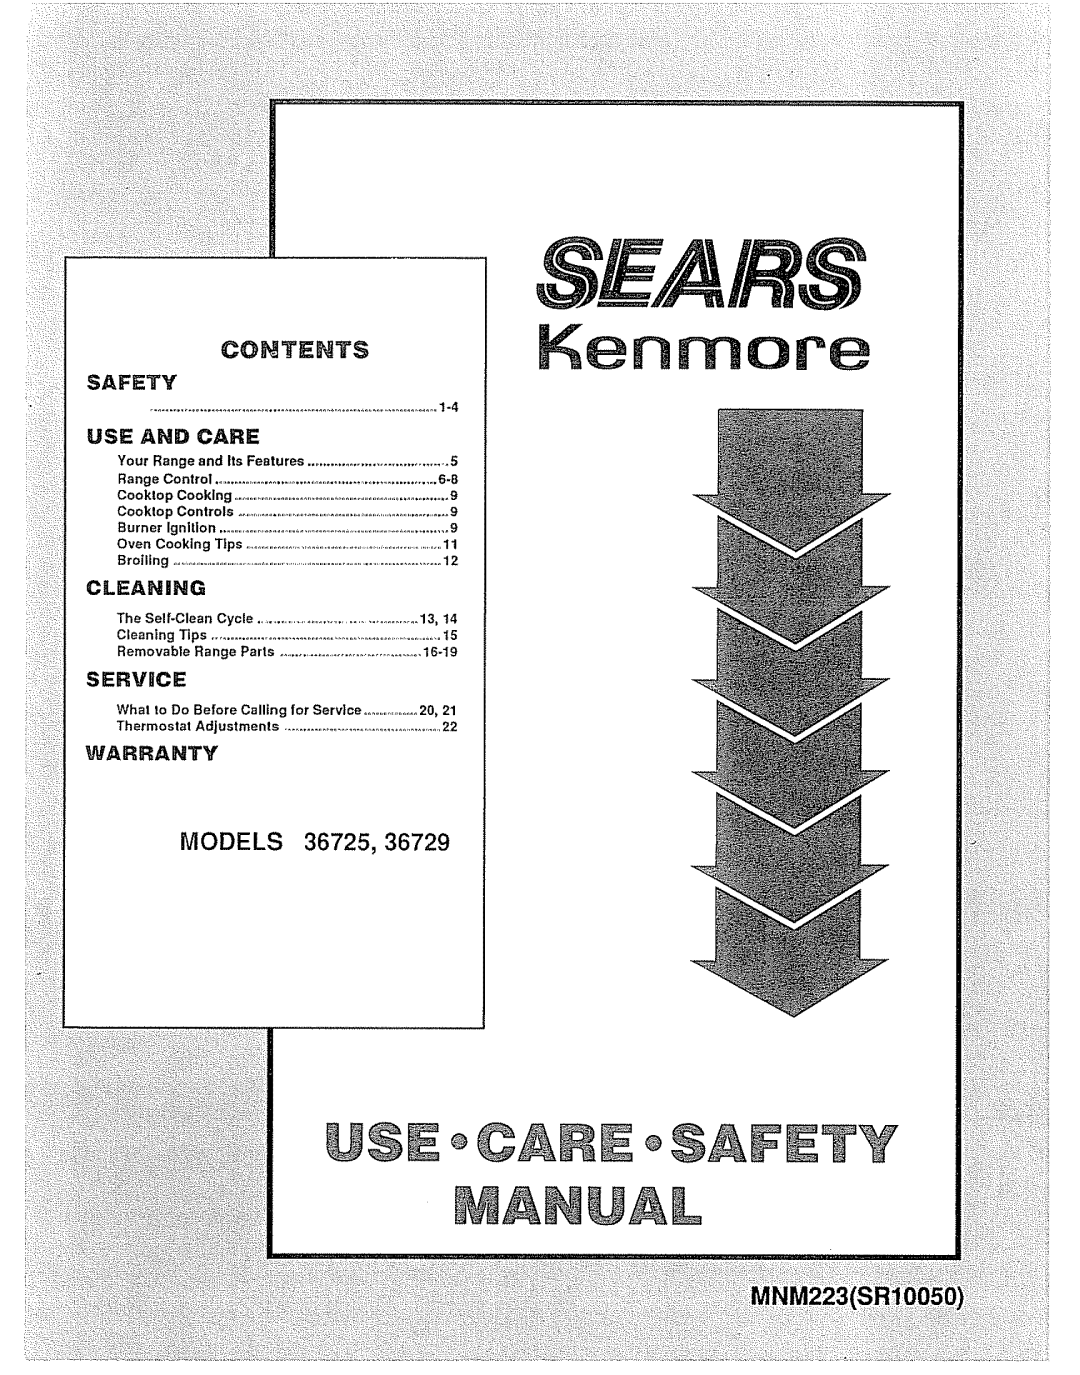 Sears 36725, 36729 warranty Contents, Models, Safety Use And Care, Cleaning, Servdce, Warranty 